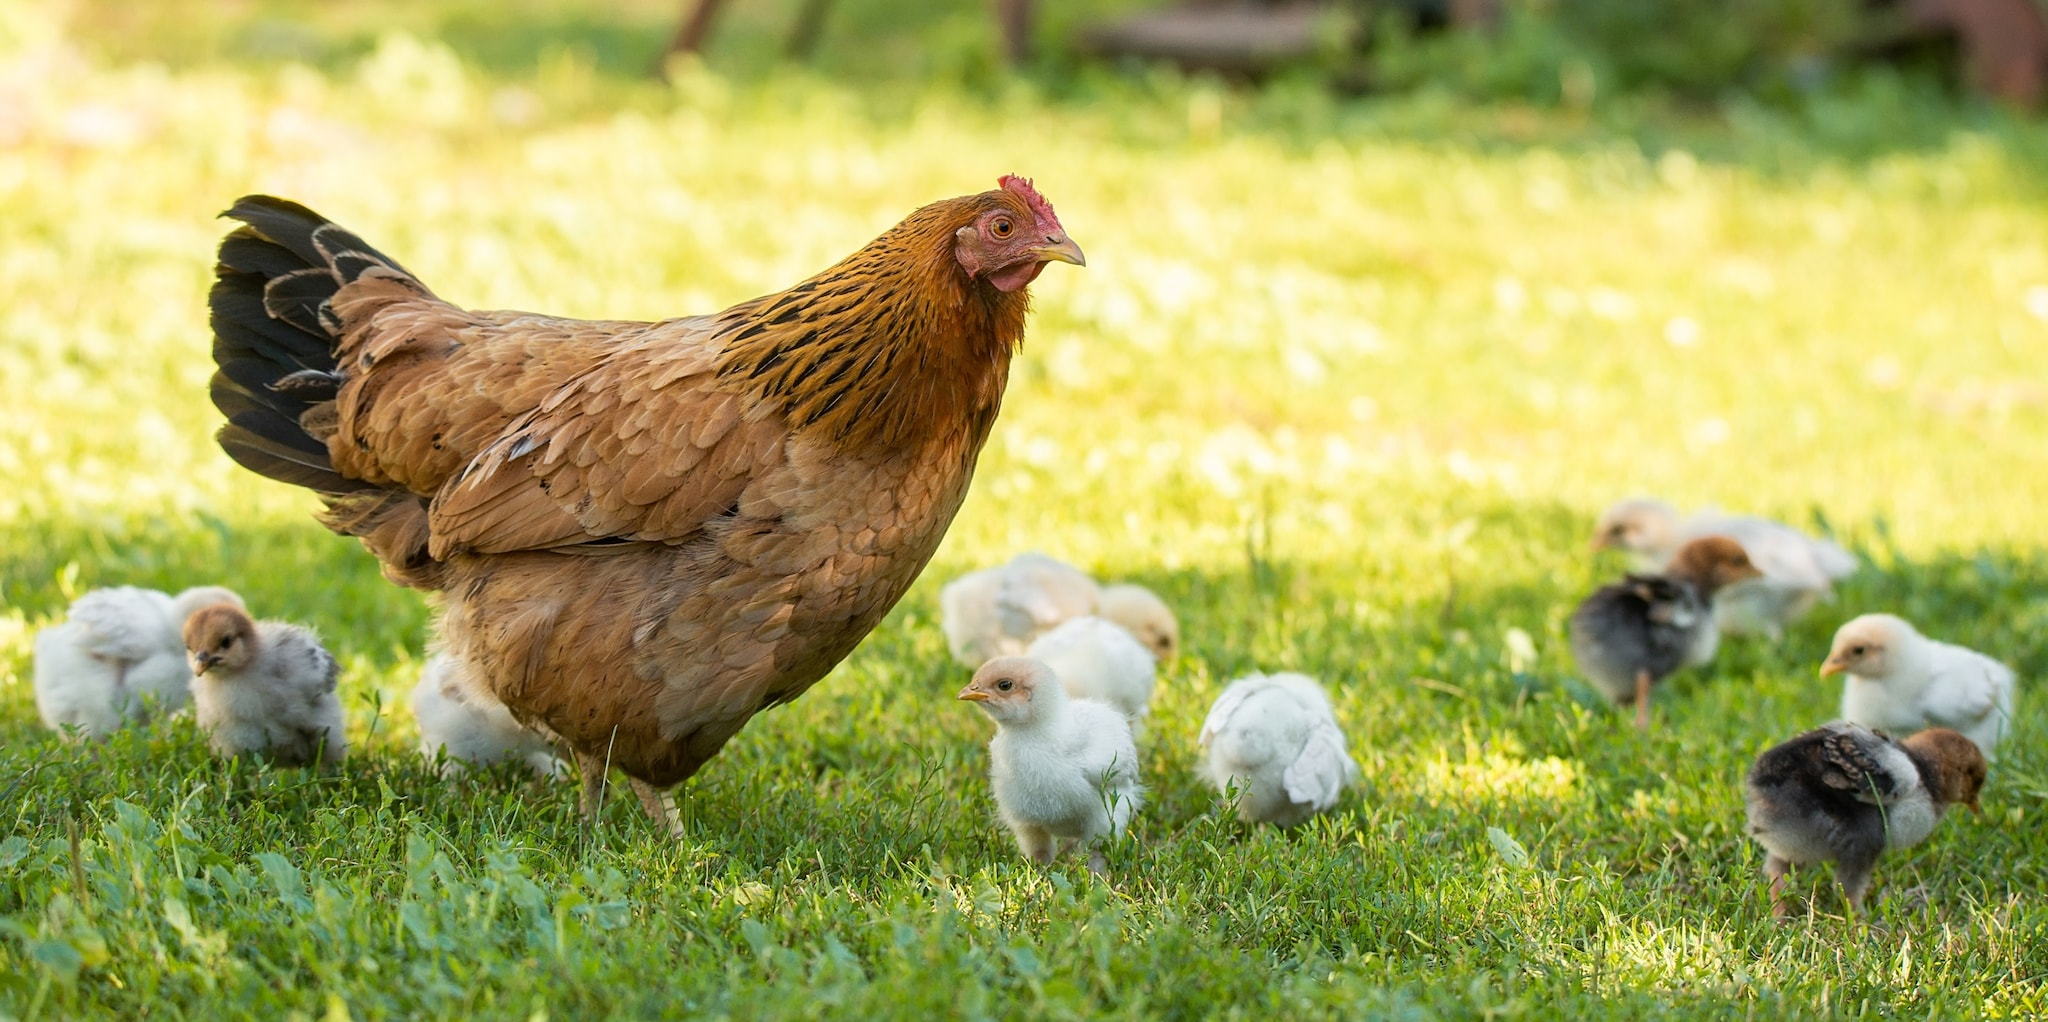  CDC: Salmonella Outbreaks Linked to Backyard Poultry 